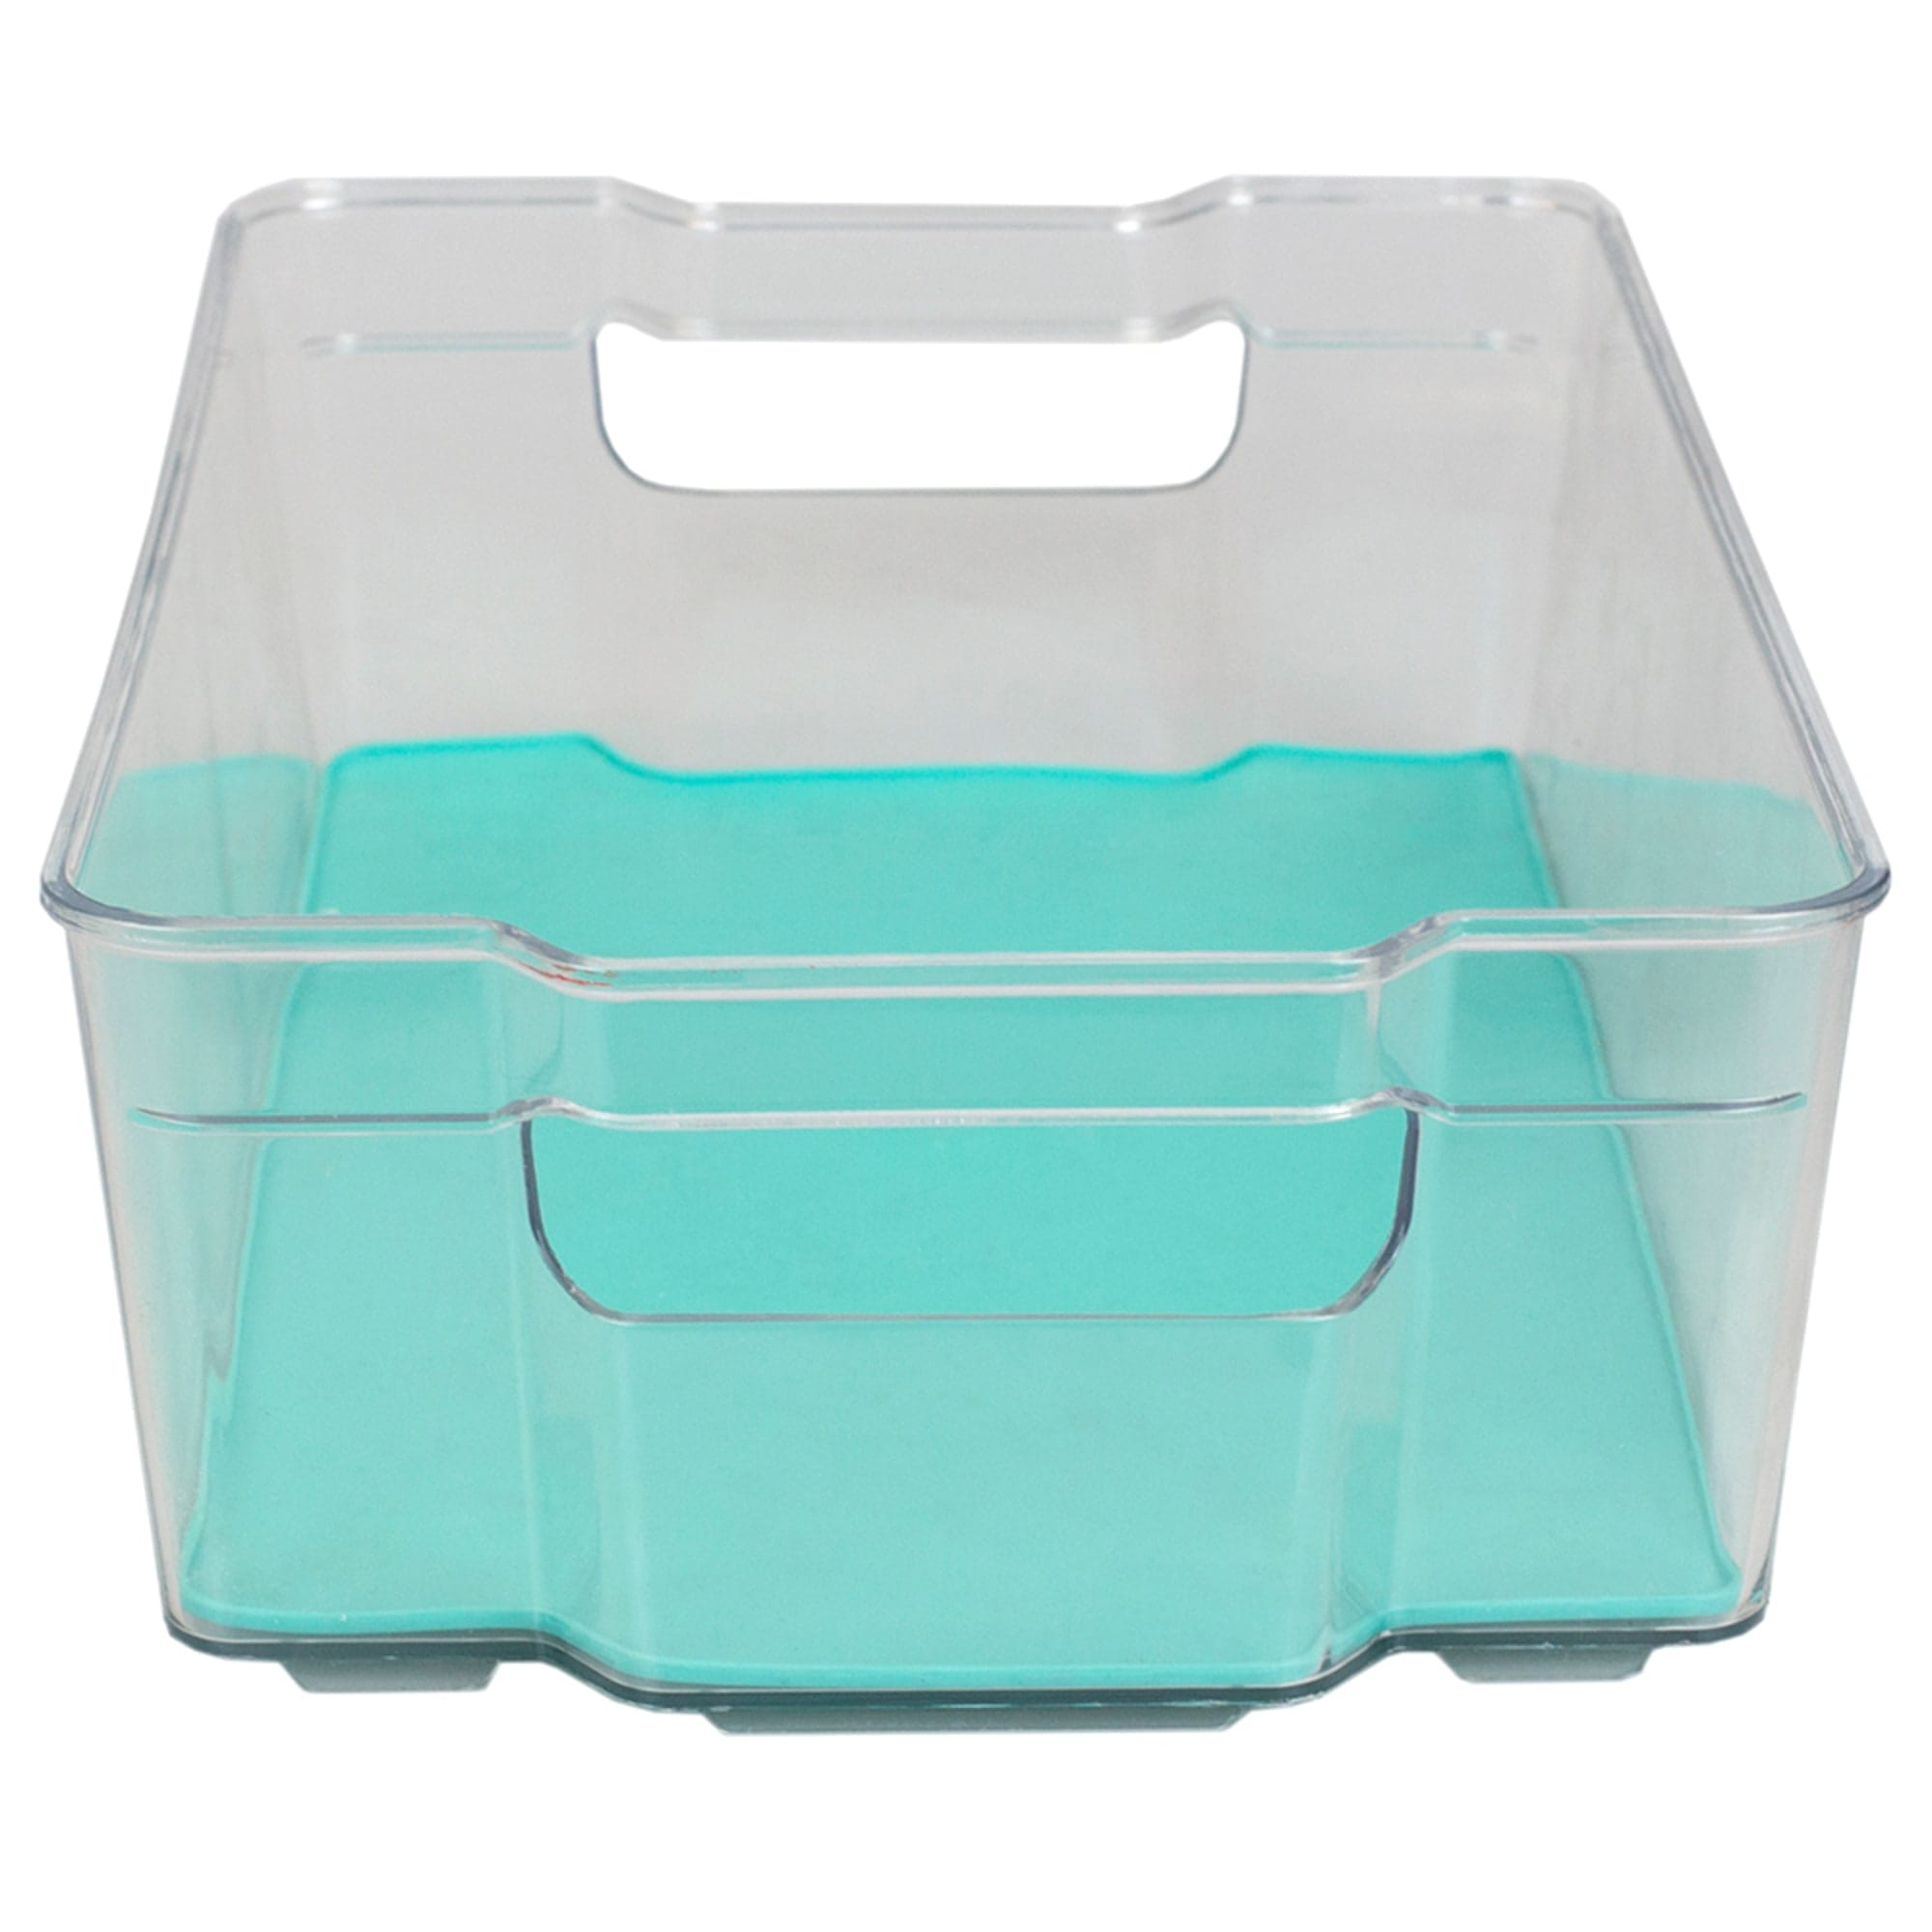 Home Basics 9" x 15" Multi-Purpose Plastic Fridge Bin with Rubber Lining, Turquoise $6 EACH, CASE PACK OF 12